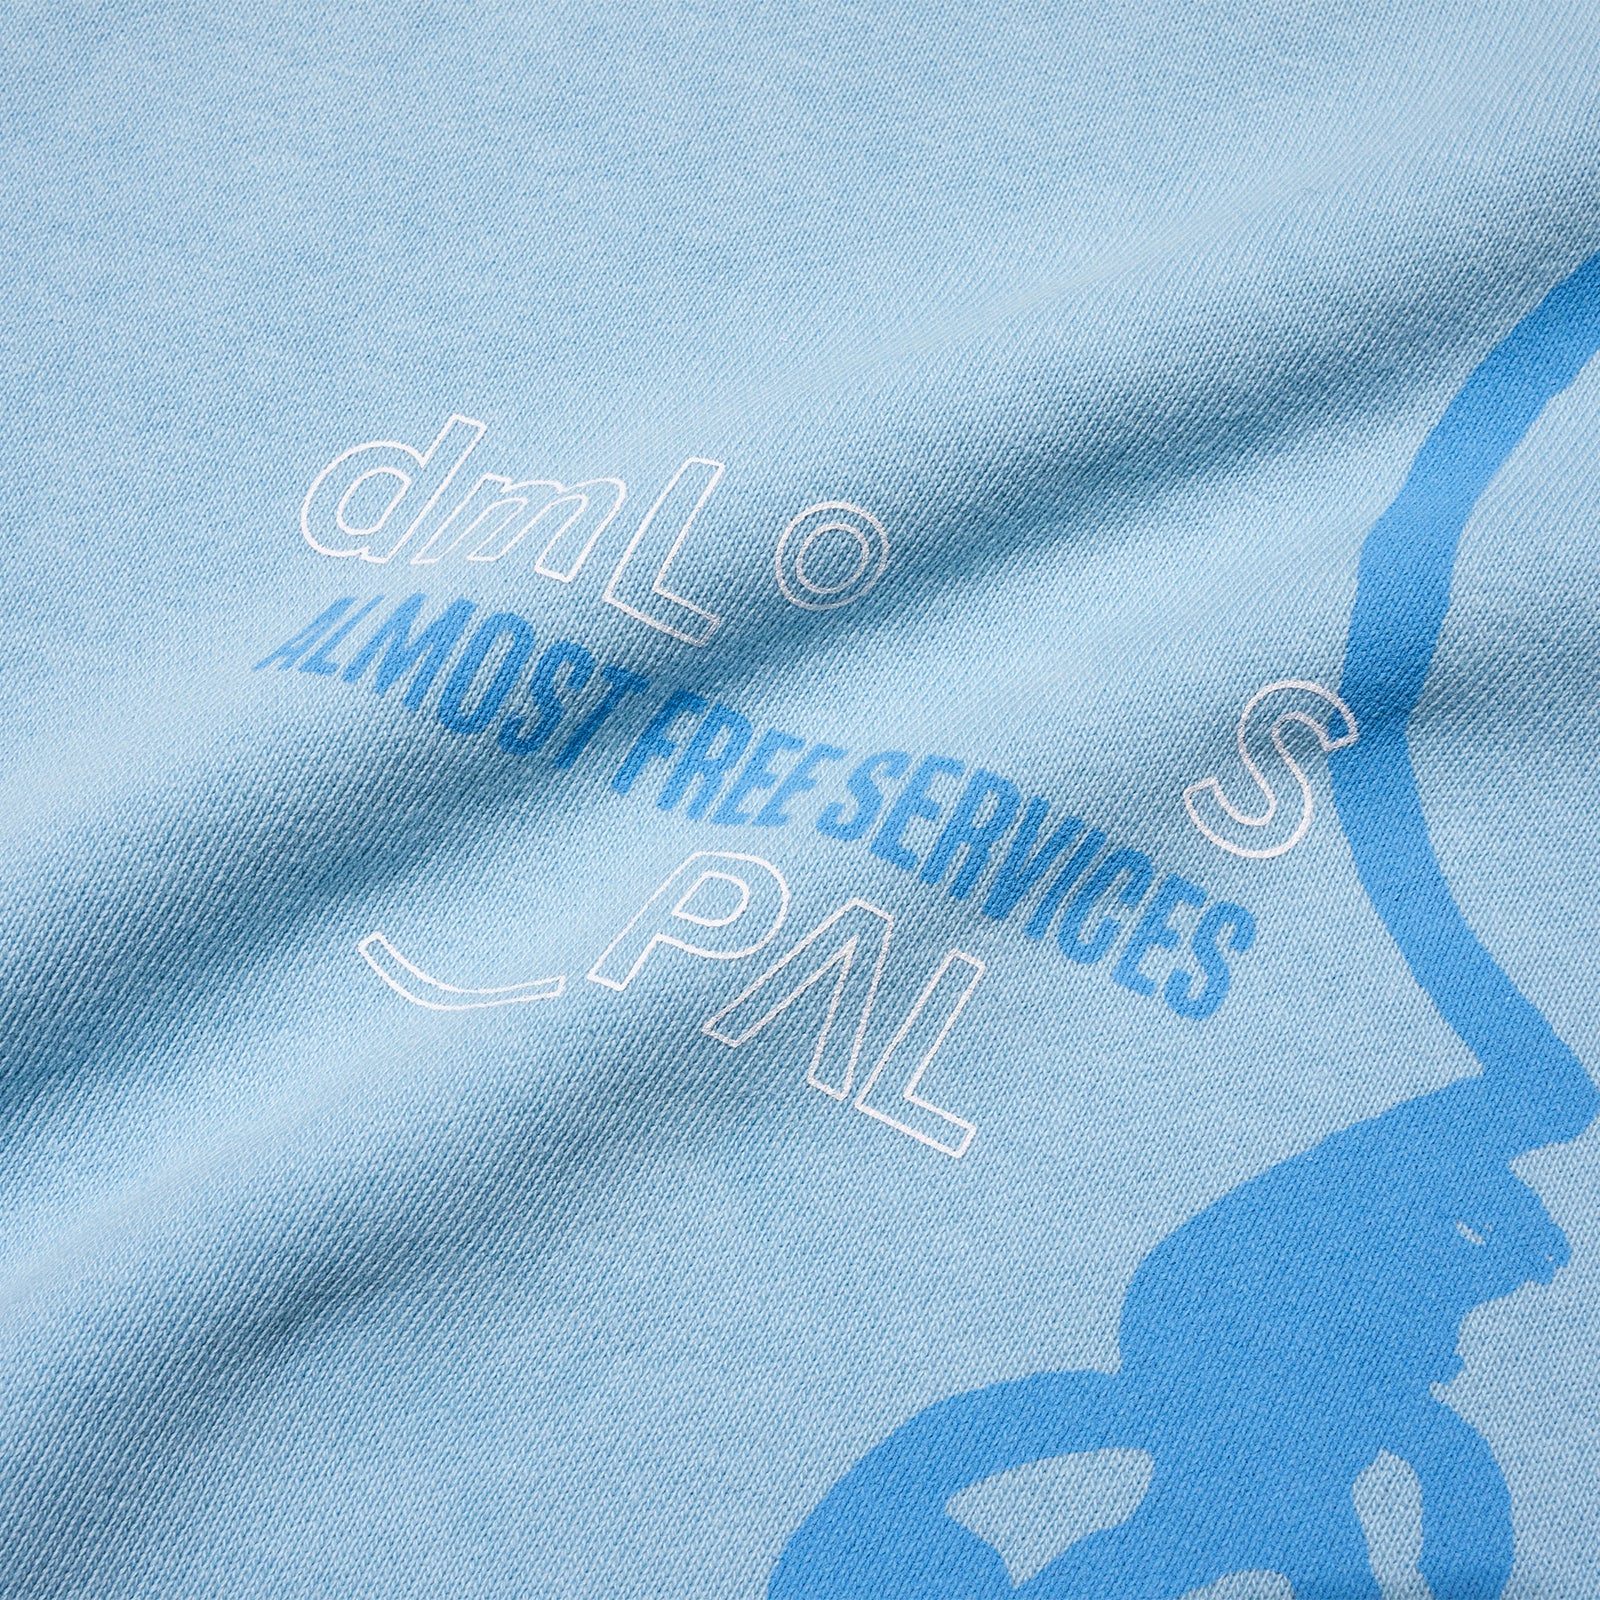 ALMOST FREE SERVICES X DML X OPALS "THE HOUSE CREWNECK SWEAT"